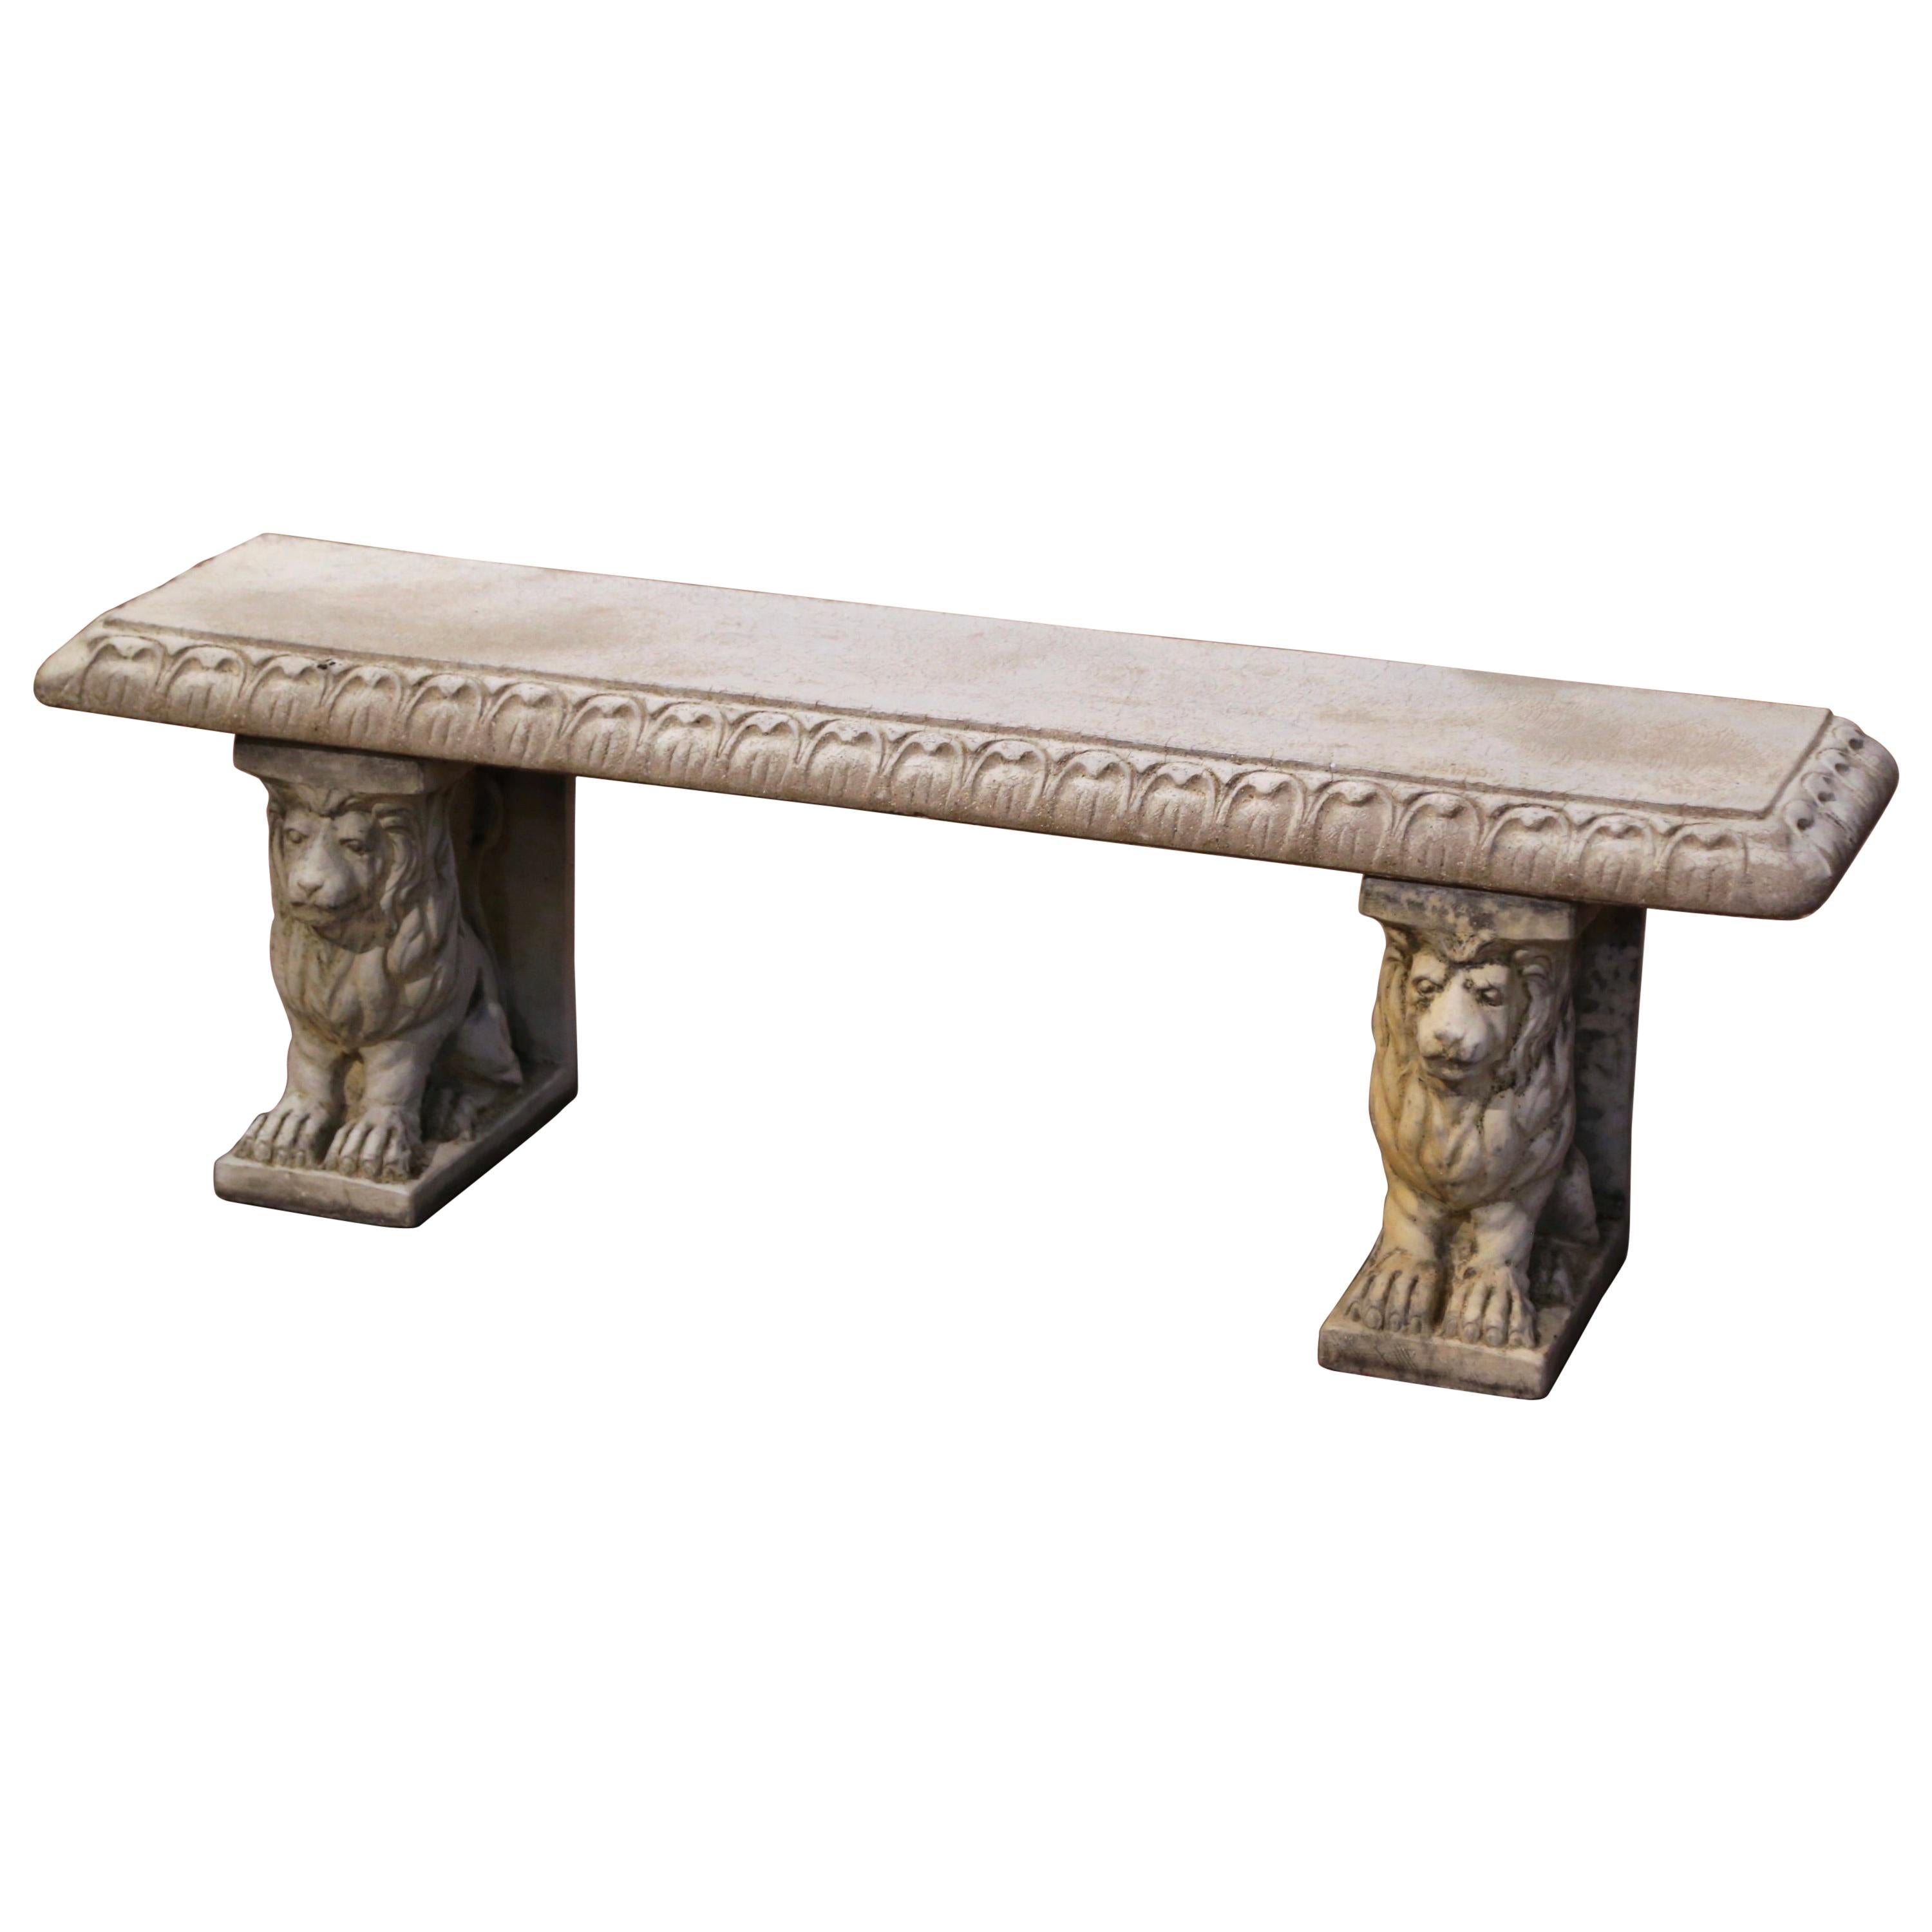 Vintage French Weathered Concrete Three-Piece Garden Bench with Lion Figures